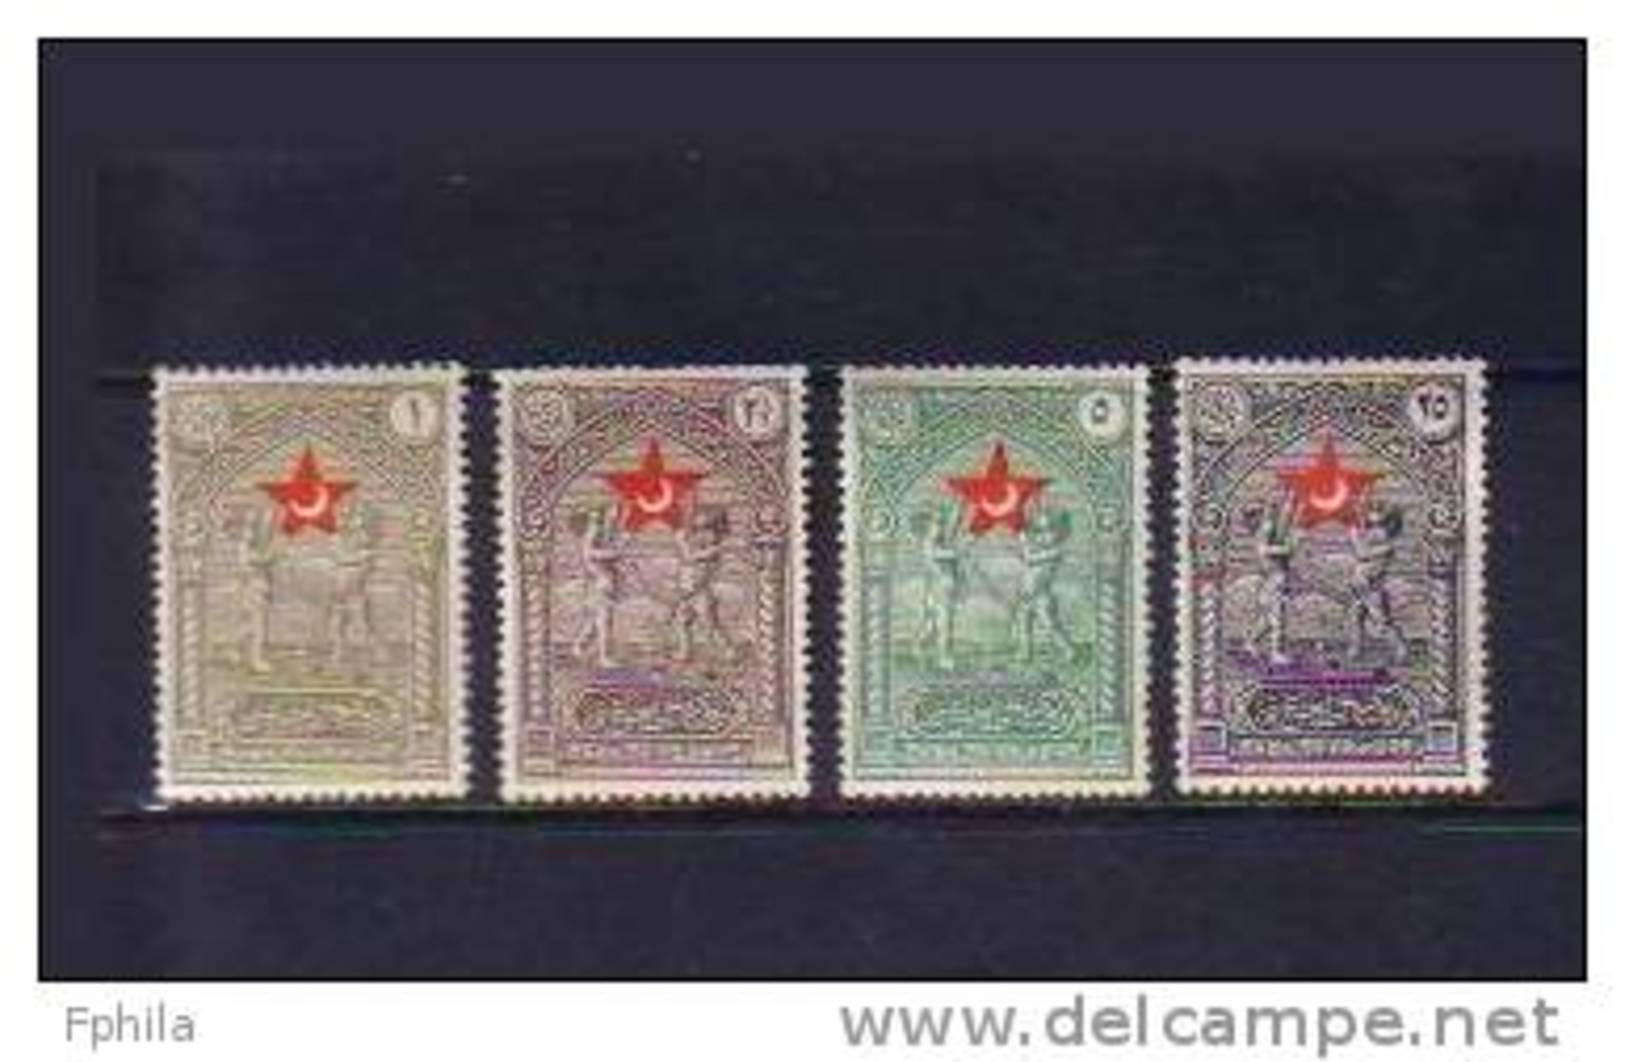 1928 TURKEY STAMPS IN AID OF THE TURKISH SOCIETY FOR THE PROTECTION OF CHILDREN MINT WITHOUT GUM - Francobolli Di Beneficenza